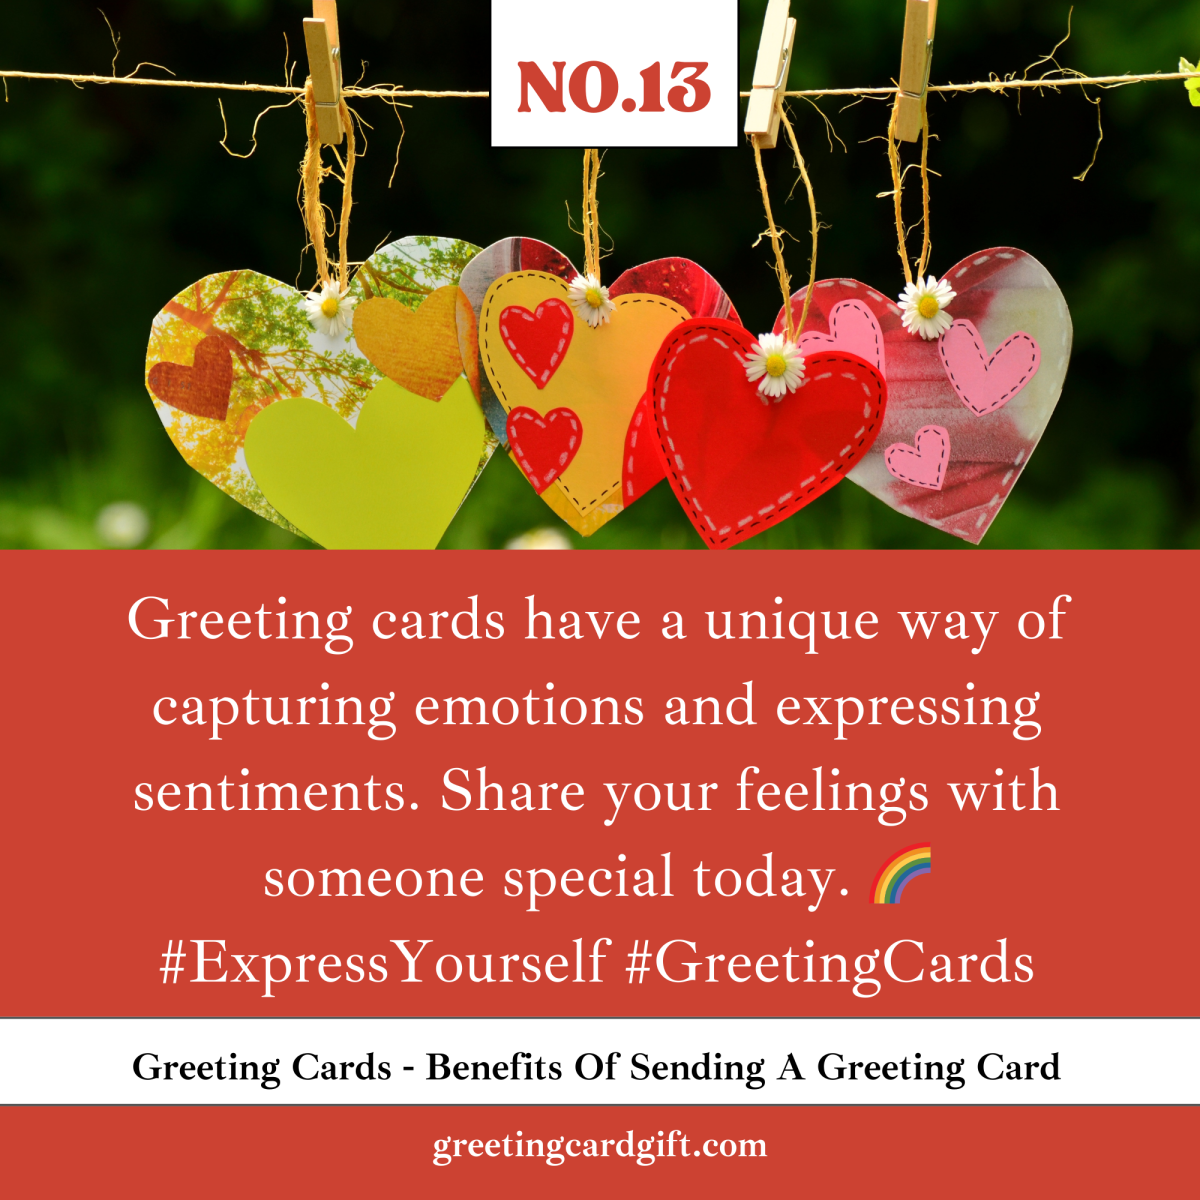 Greeting Cards – Benefits Of Sending A Greeting Card No.13